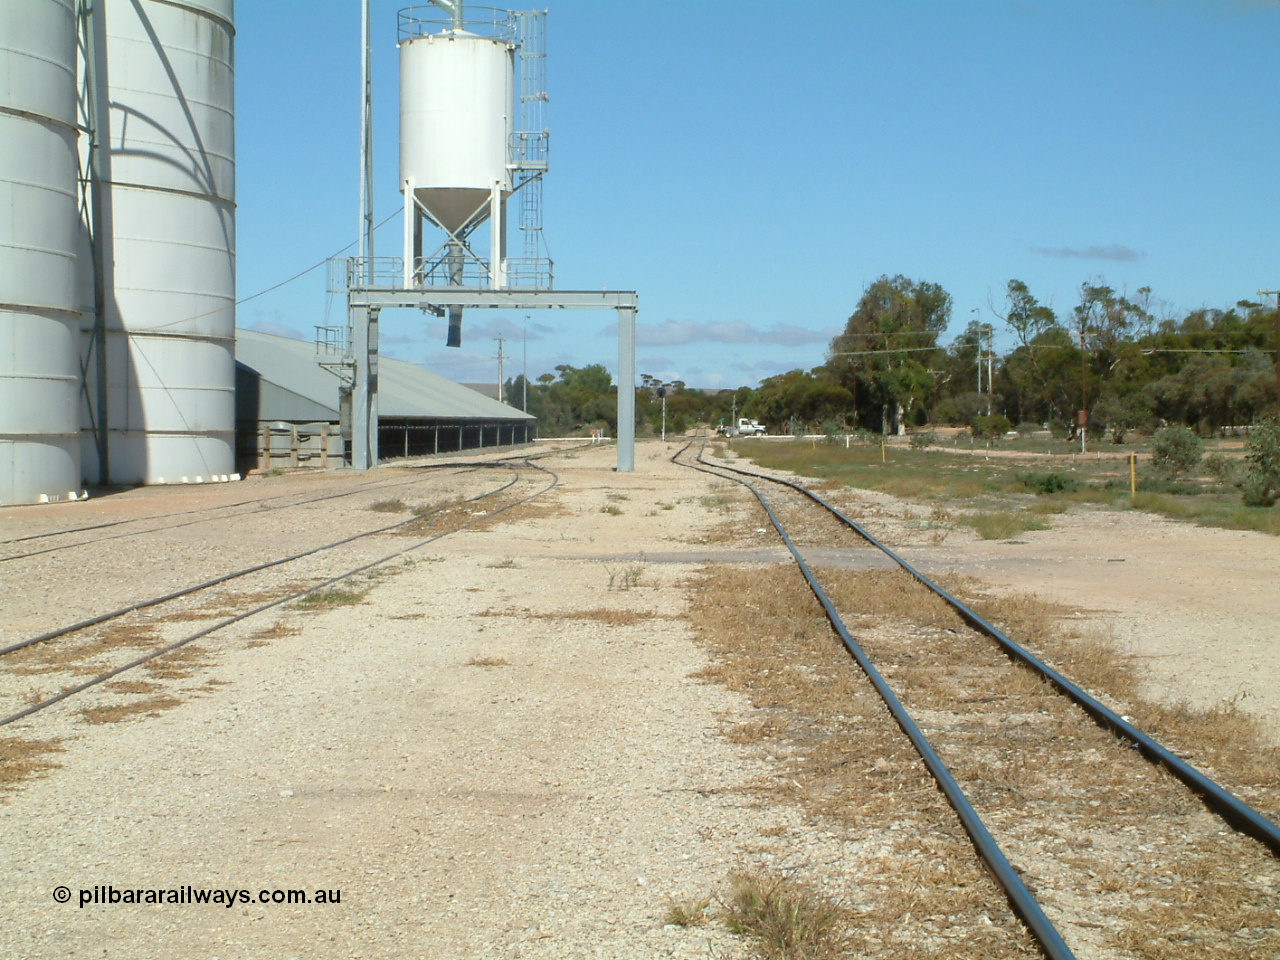 030411 110554
Kimba, yard view looking south, mainline on the right, Ascom loadout gantry and silo with horizontal bunker beyond that. Eyre Highway grade crossing in the distance.
